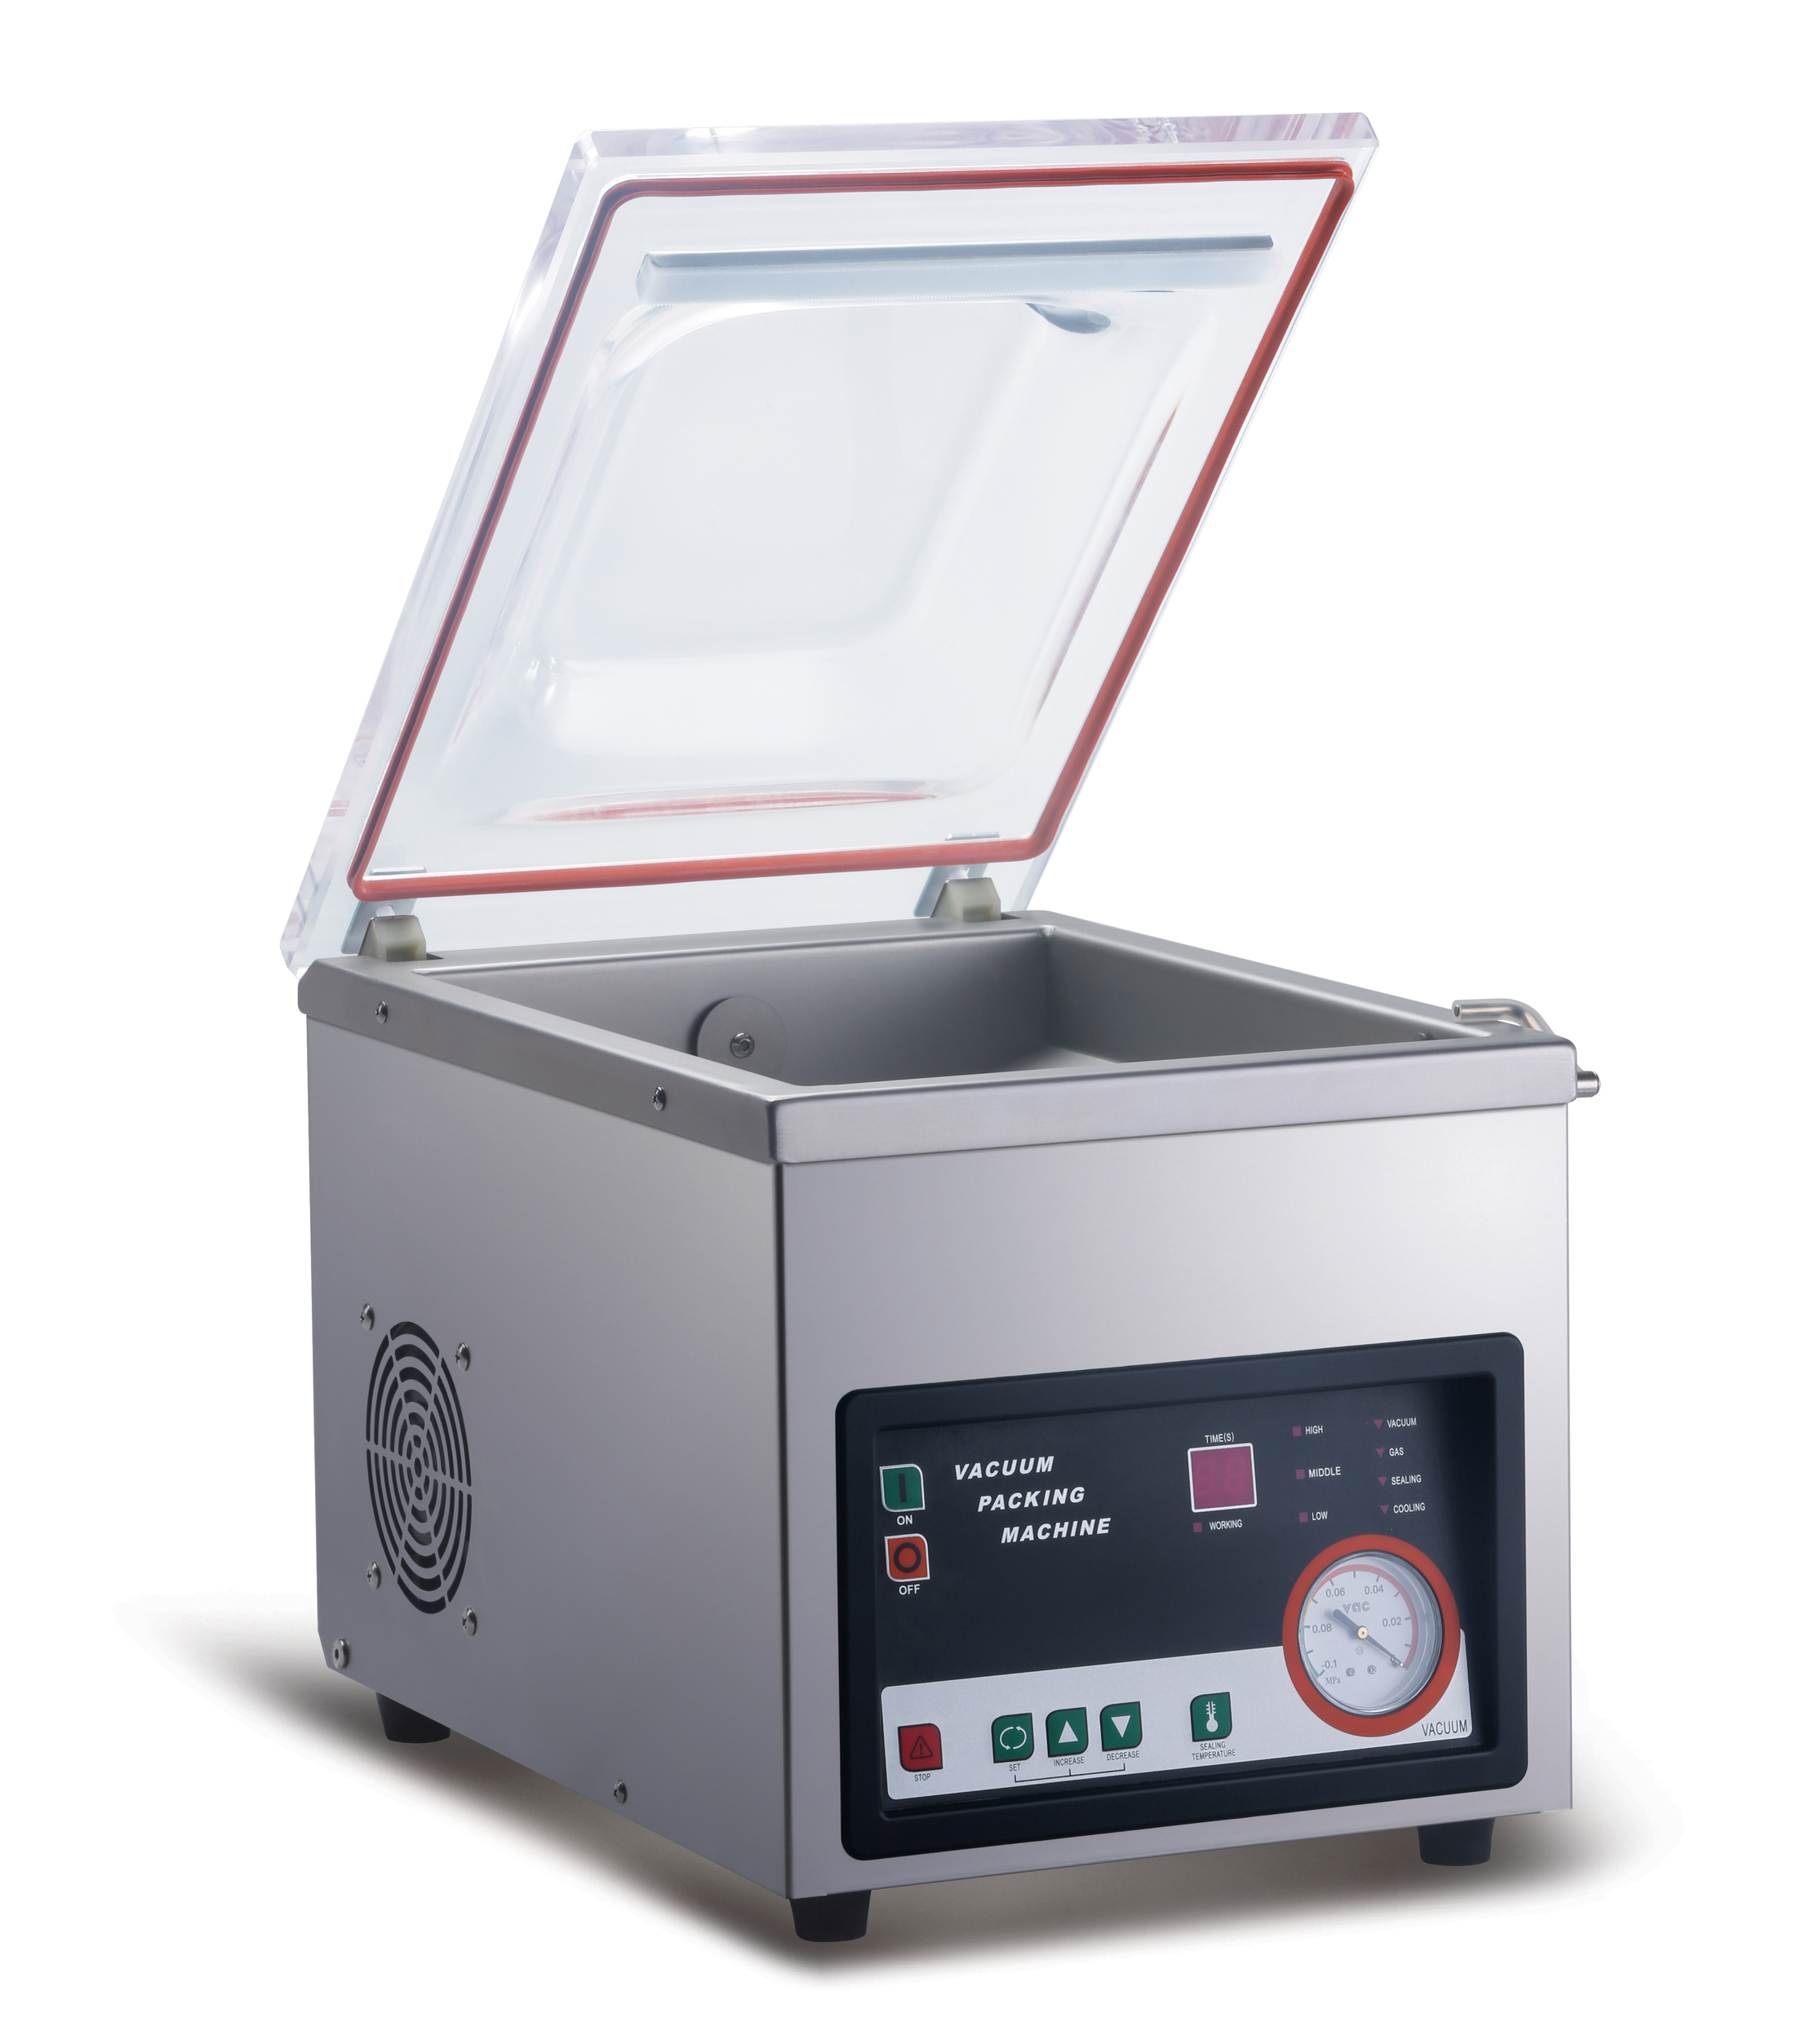 Thermoplongeur 2000 W - CUISSON SOUS VIDE - Airblock